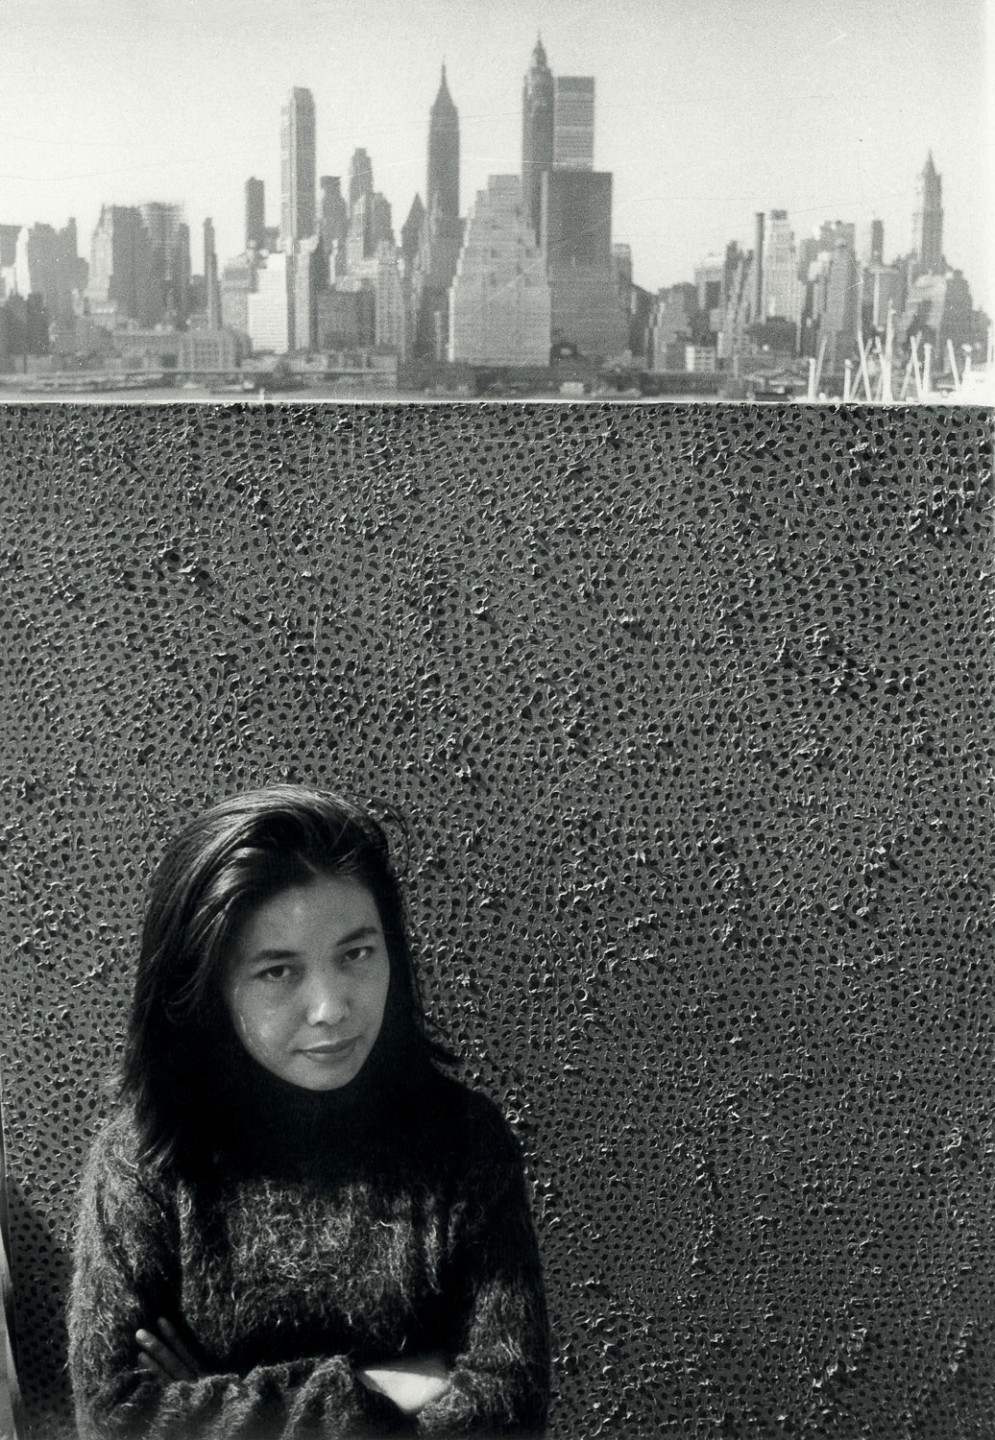 Yayoi Kusama with one of her Infinity Net paintings in New York, c. 1961.